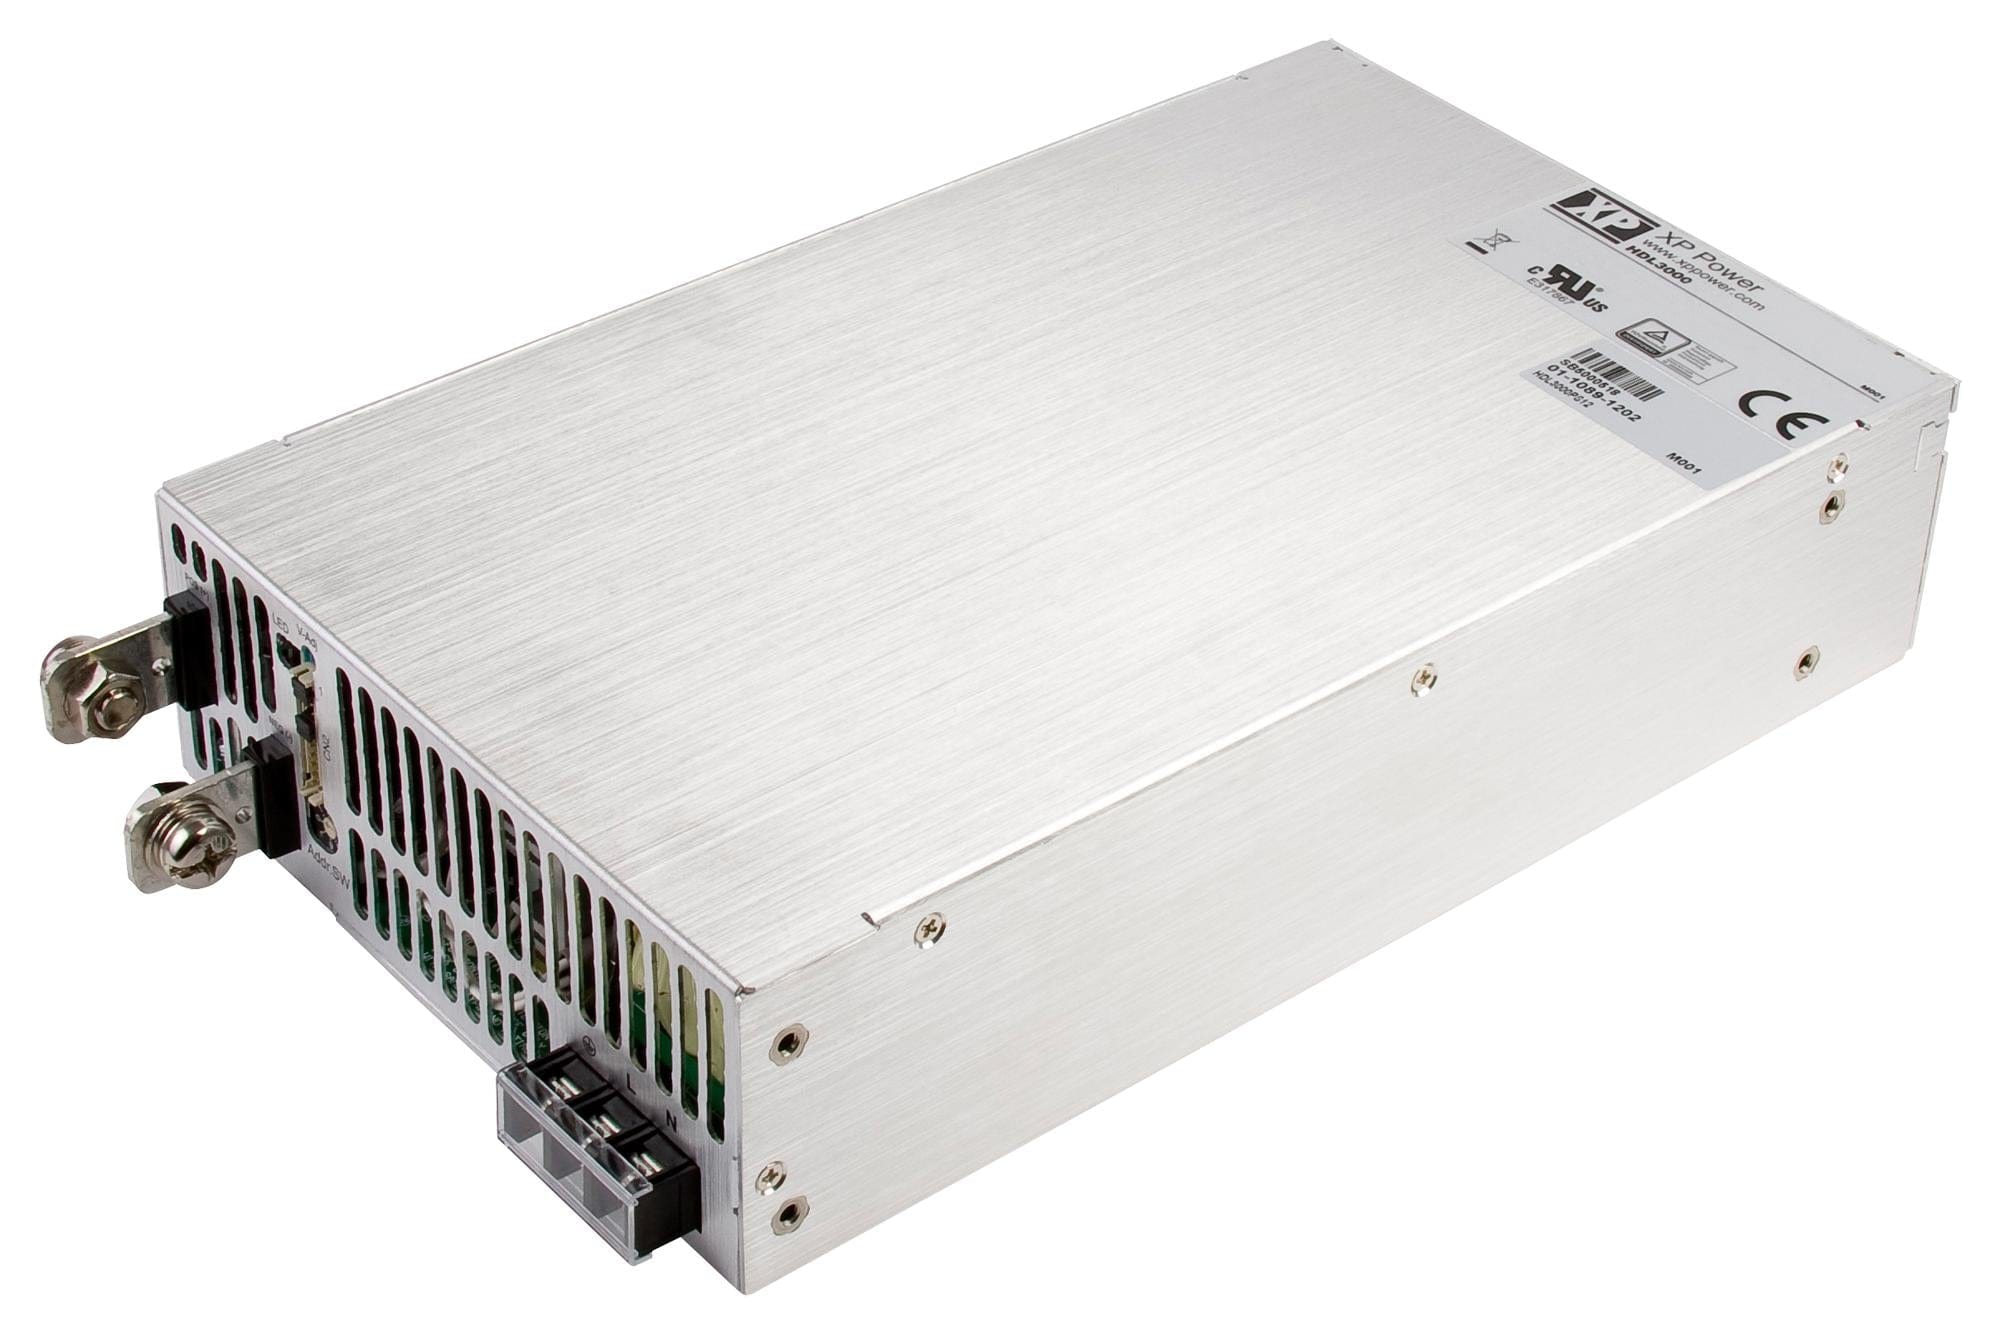 XP POWER Enclosed - Single Output HDL3000PS48 POWER SUPPLY, AC-DC, 48V, 62.5A XP POWER 3524110 HDL3000PS48